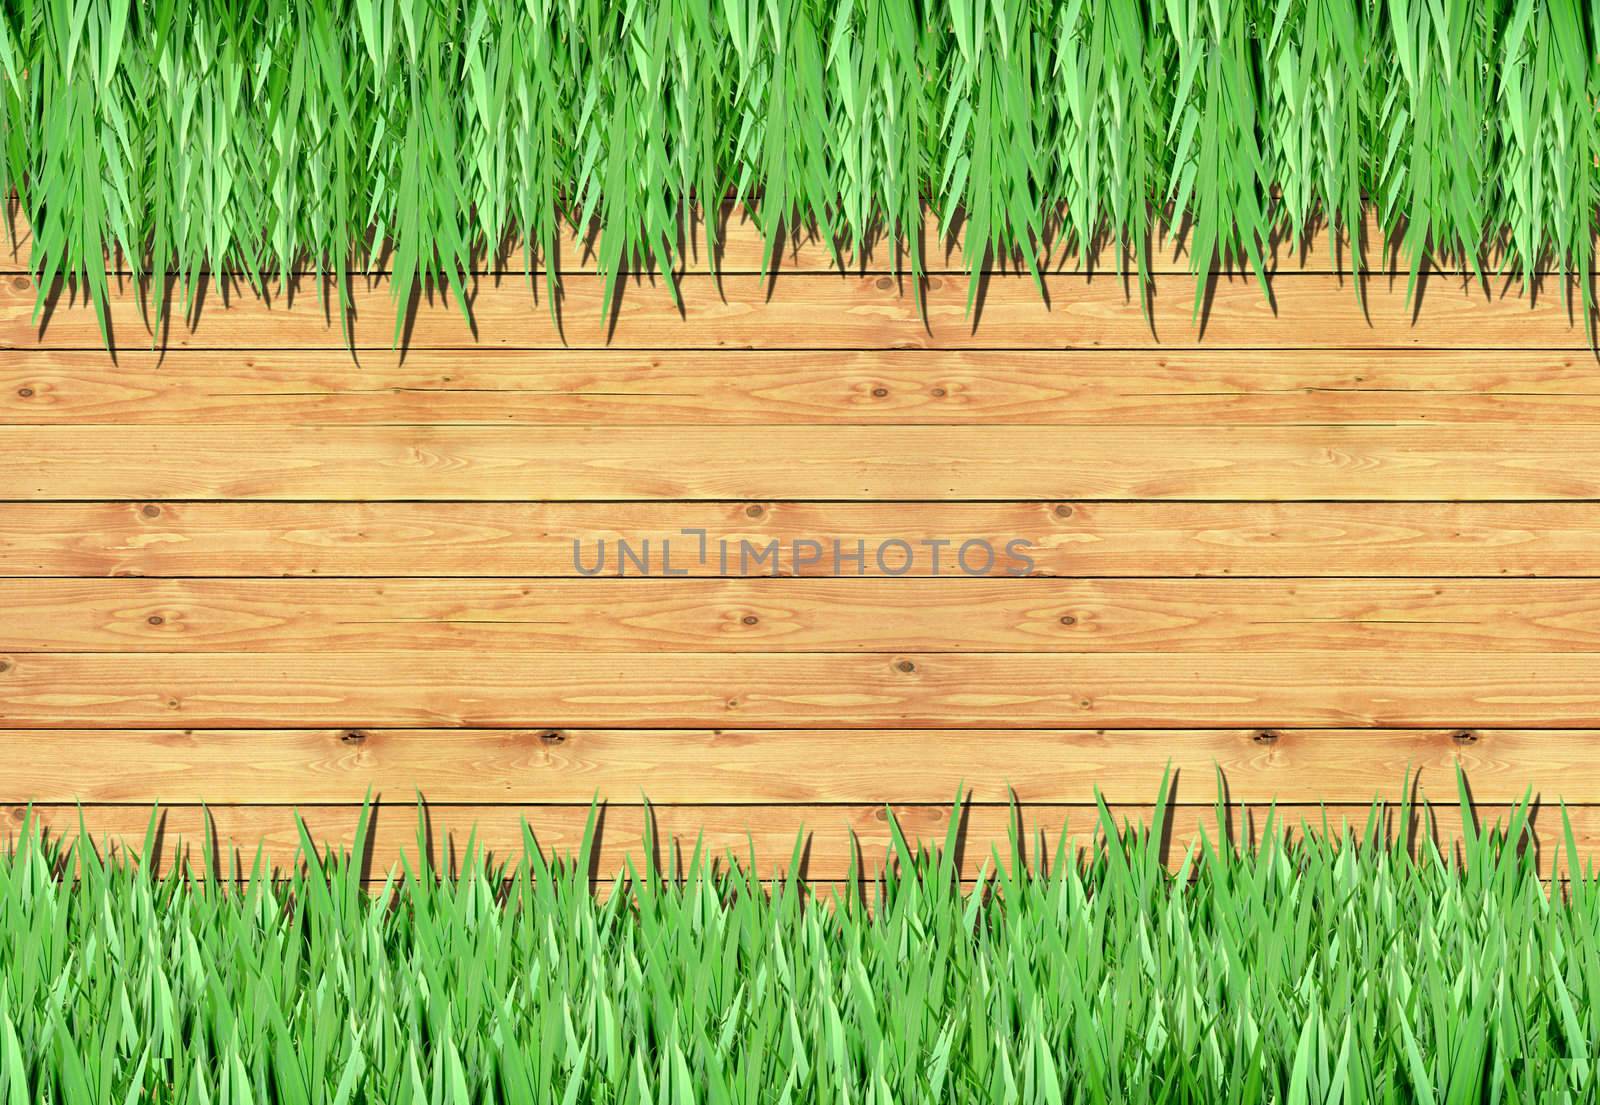 Grass, wood frame with the background